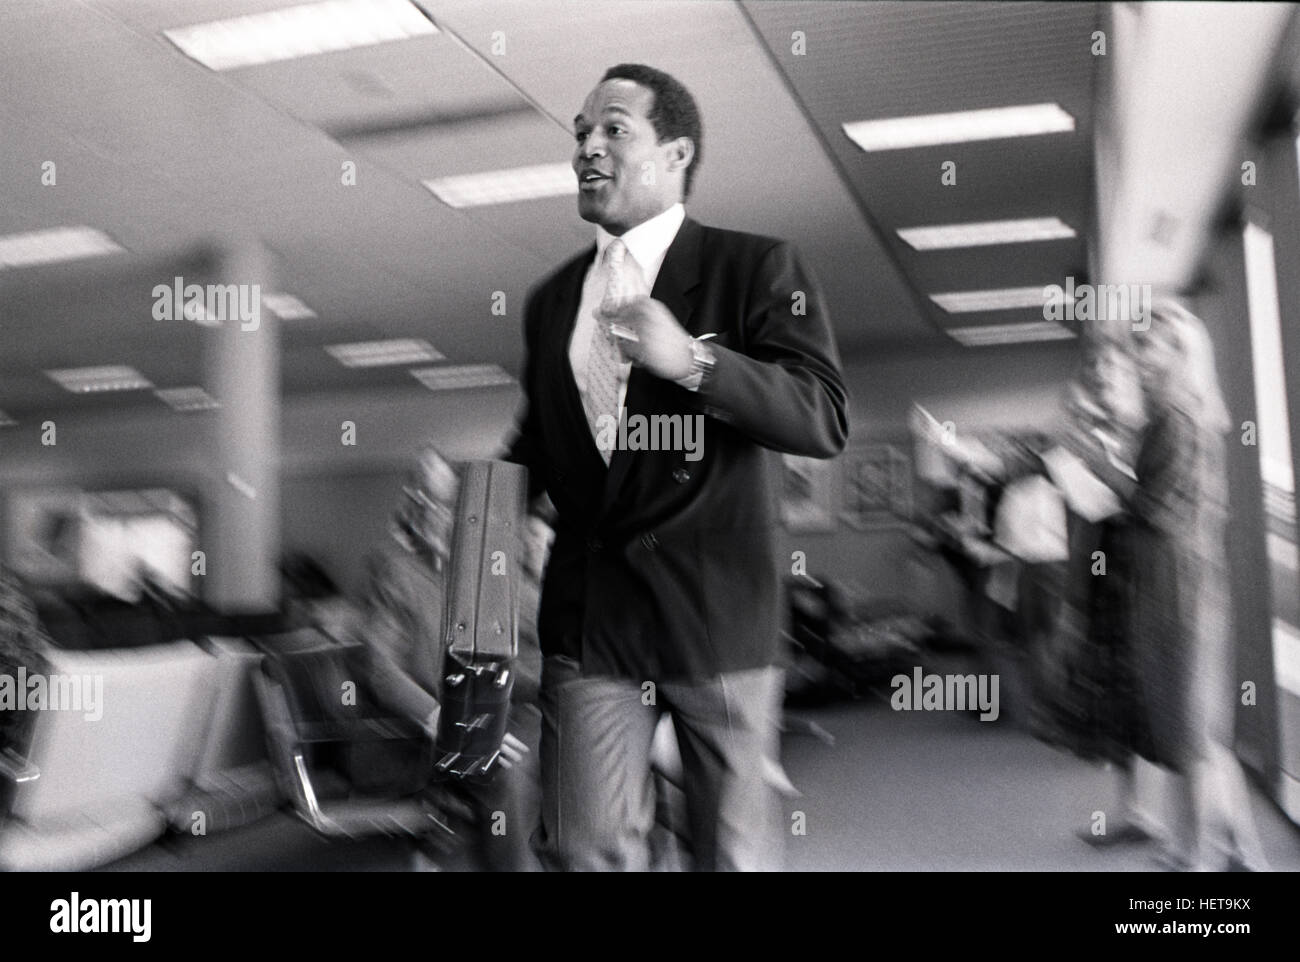 Athlete,spokesman and later - accused double murder O. J Simpson runs through an airport terminal during a filming of a television ad at the Atlanta Airport. Simpson was the face of Hertz Car Rental for many years. Stock Photo